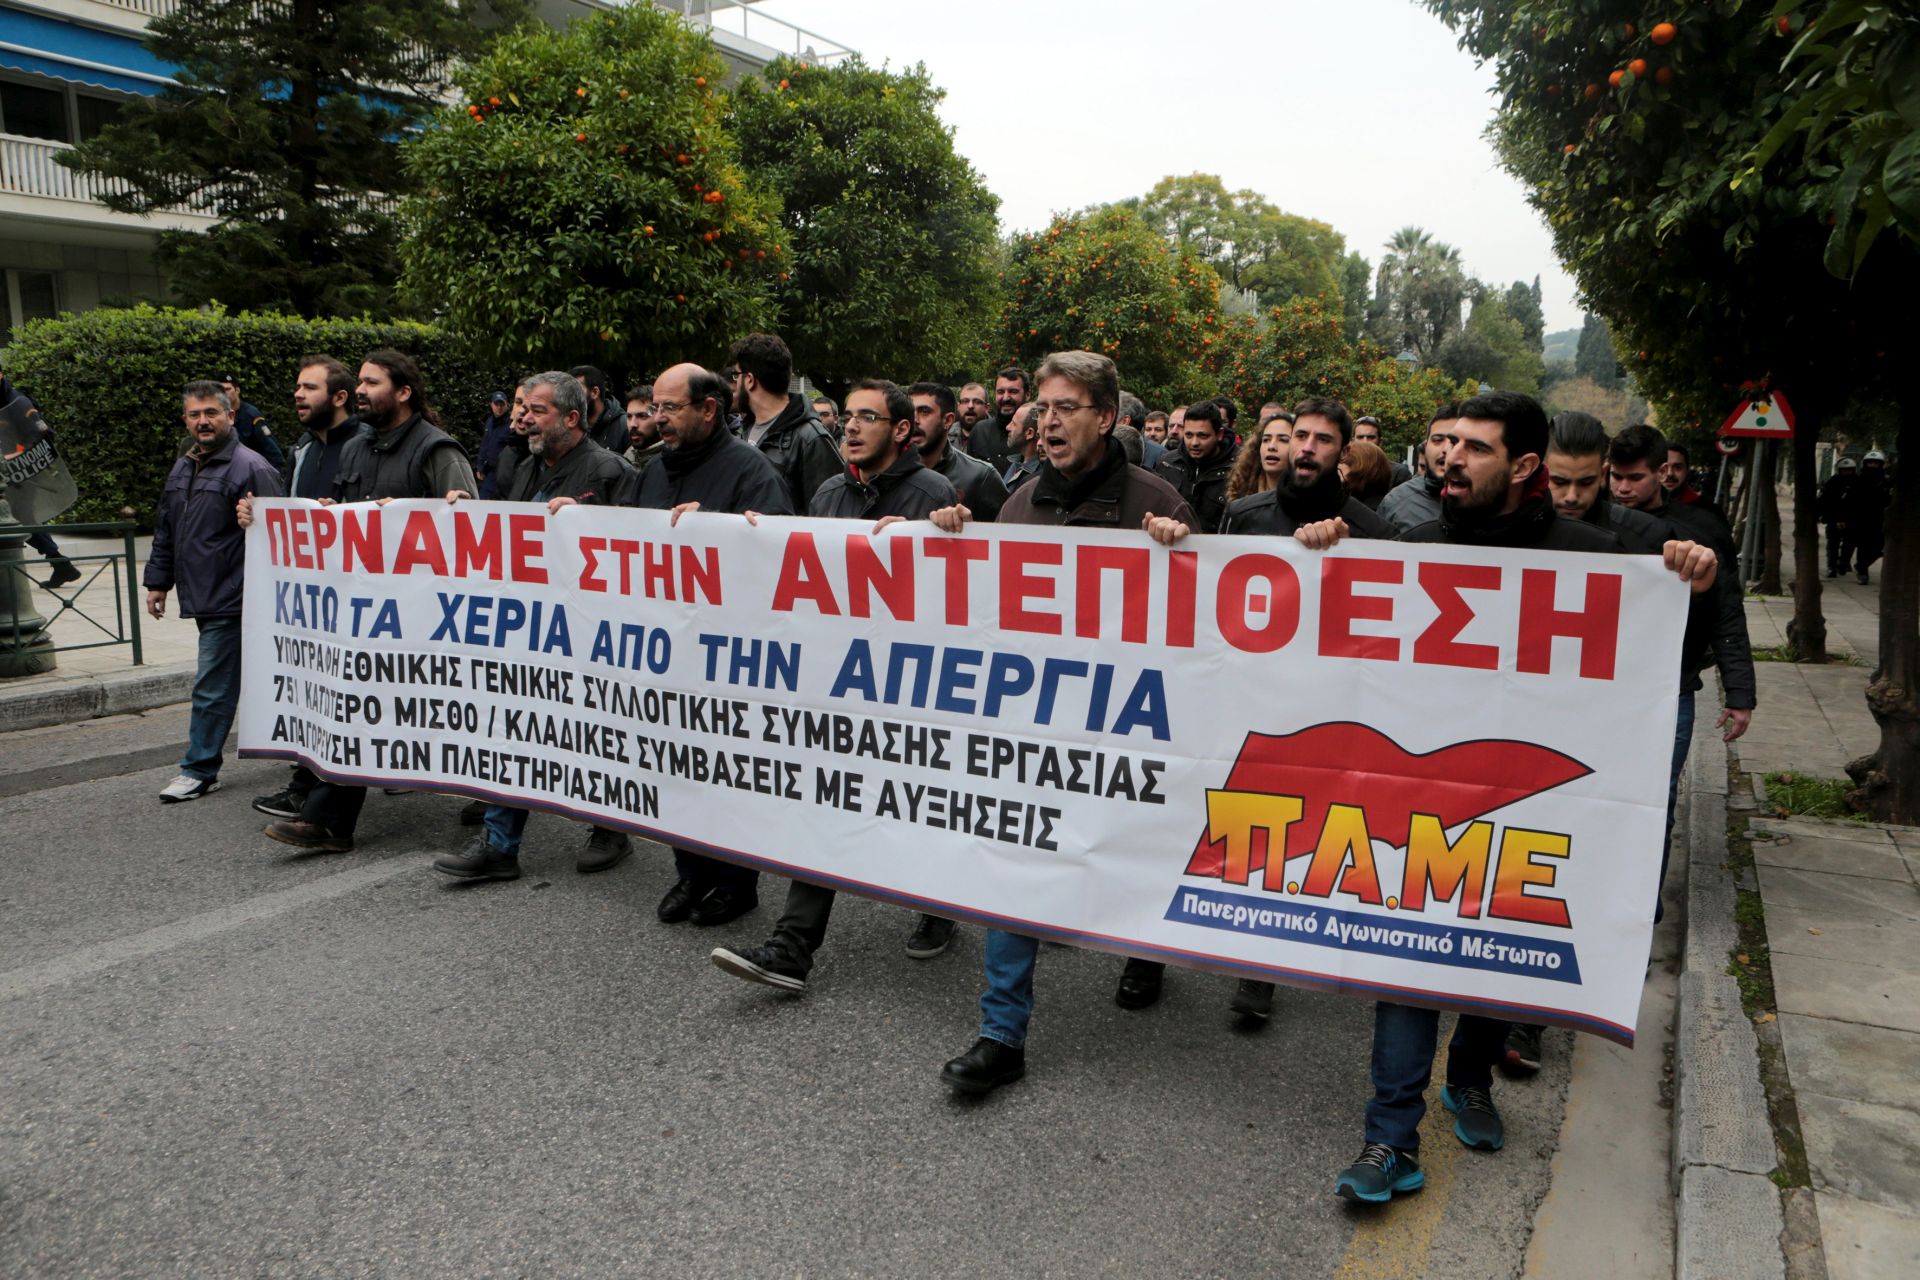 epa06428625 Members of Greek labour unions collaborating with PAME, the Communist Party-affiliated union, shout slogans during a protest at Maximos Mansion, the Greek Prime Minister's seat, n Athens, Greece, 10 January 2018, demanding the government to withdraw their draft omnibus bill that they fear 'limits the right to strike and increases home foreclosures'.  EPA/PANTELIS SAITAS